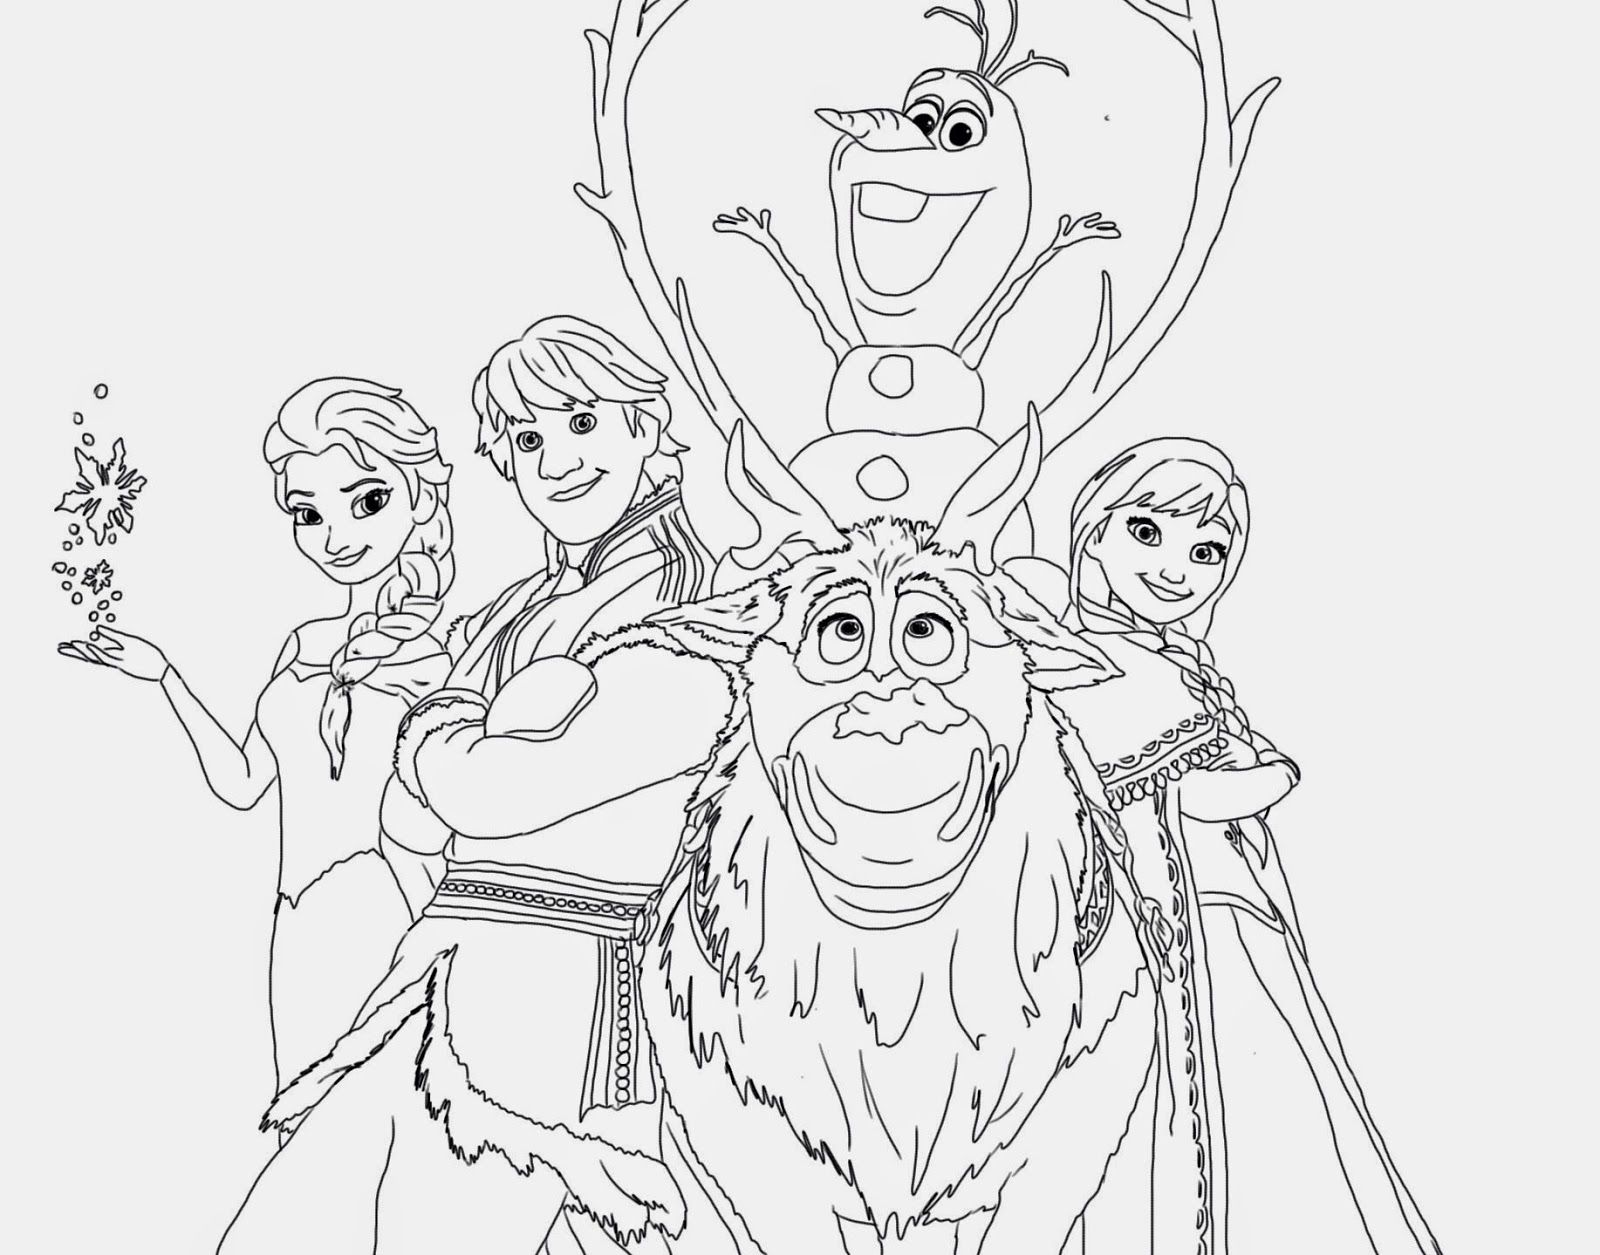 Disney Frozen Coloring Pages Printable ~ Instant Knowledge